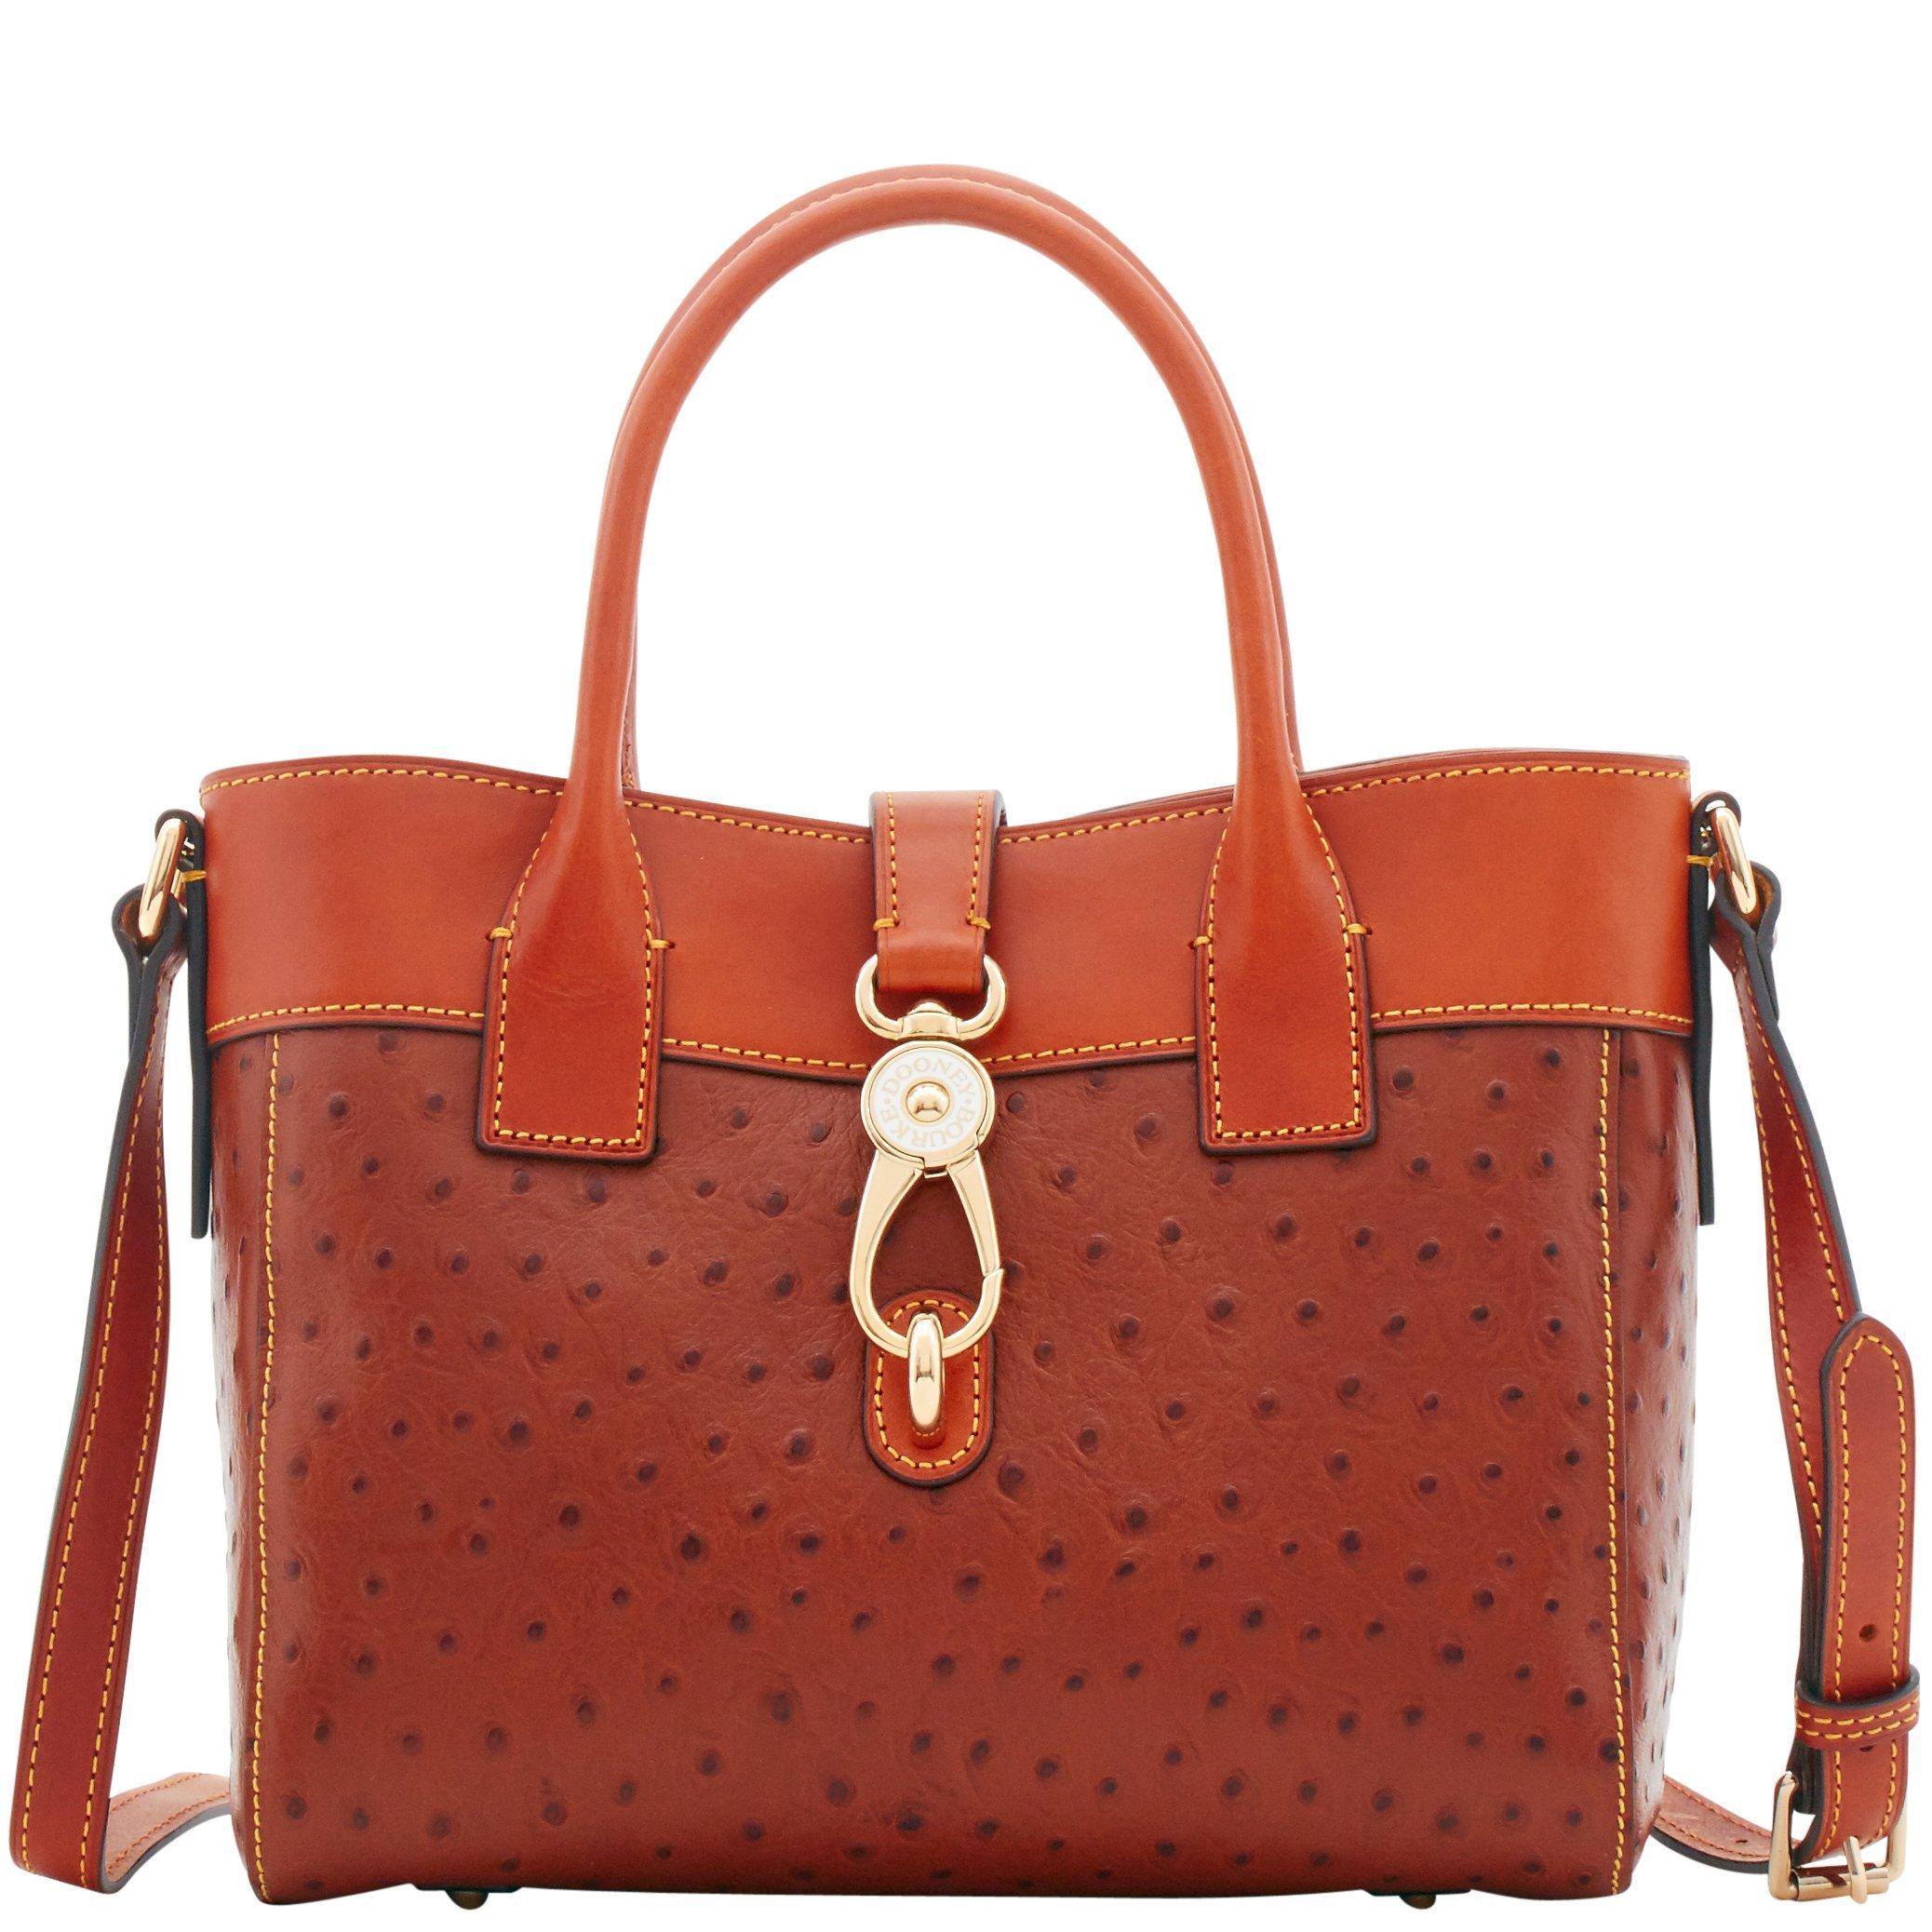 Dooney & Bourke Leather Ostrich Amelie Tote in Cognac (Red) - Save 25% - Lyst